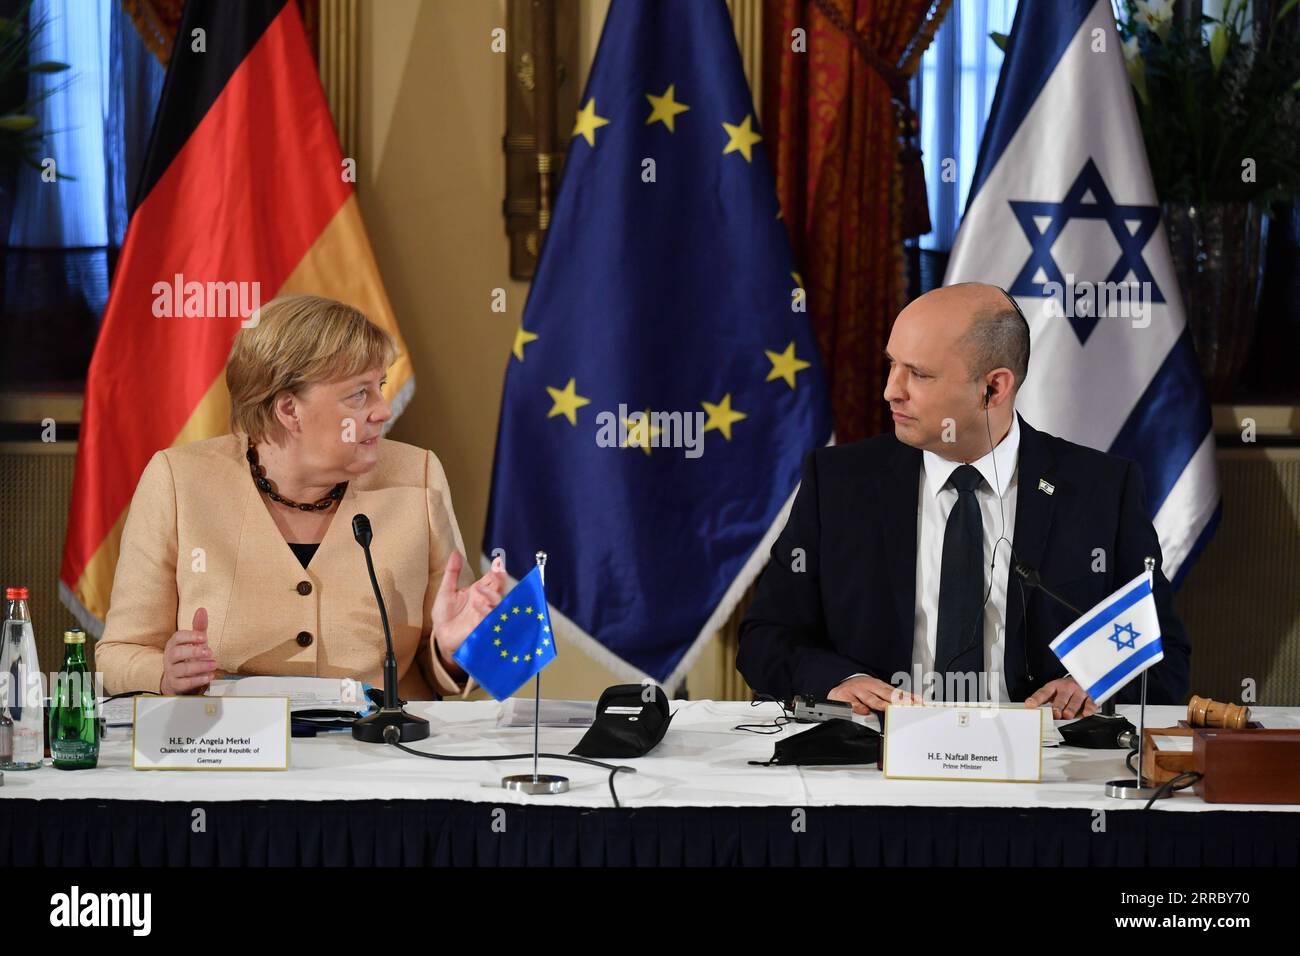 211010 -- JERUSALEM, Oct. 10, 2021 -- Israeli Prime Minister Naftali Bennett R meets with German Chancellor Angela Merkel at the King David Hotel in Jerusalem, Oct. 10, 2021. Germany s outgoing Chancellor Angela Merkel kick-started her visit to Israel on Sunday morning, marking her final official trip to the country before she leaves office. Photo by via Xinhua MIDEAST-JERUSALEM-GERMAN CHANCELLOR-VISIT YoavxDudkevitch/JINI PUBLICATIONxNOTxINxCHN Stock Photo